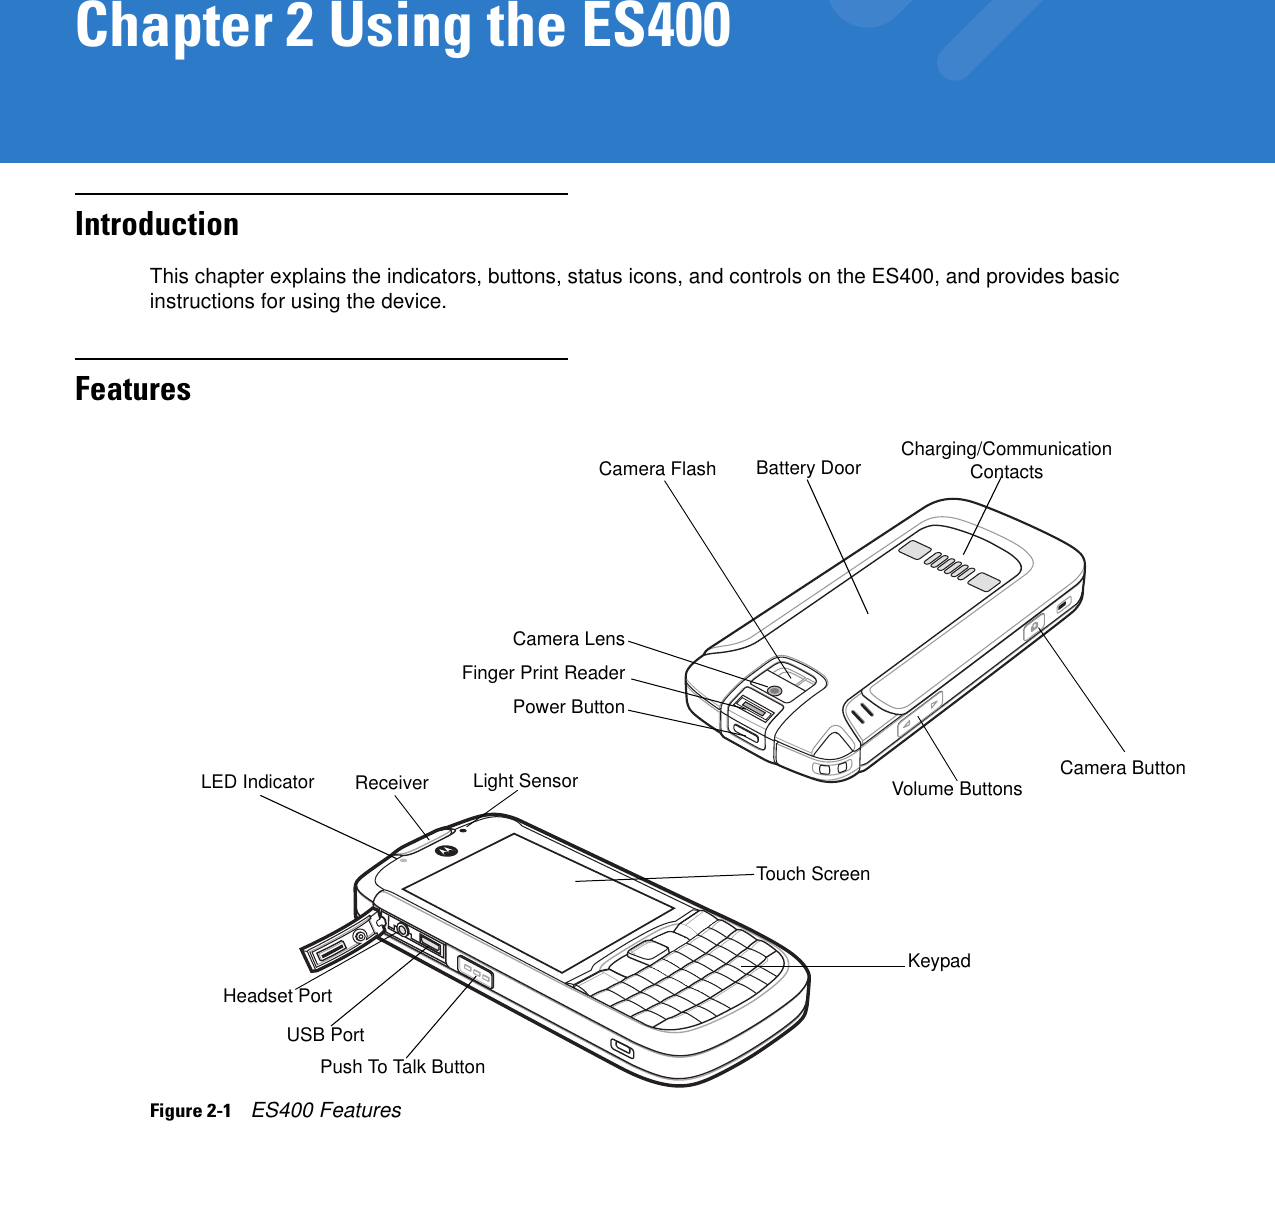 Chapter 2 Using the ES400IntroductionThis chapter explains the indicators, buttons, status icons, and controls on the ES400, and provides basic instructions for using the device.FeaturesFigure 2-1    ES400 FeaturesPower ButtonReceiverTouch ScreenVolume ButtonsKeypadPush To Talk ButtonHeadset PortUSB PortCamera ButtonLED IndicatorCamera FlashCamera LensCharging/Communication ContactsLight SensorFinger Print ReaderBattery Door